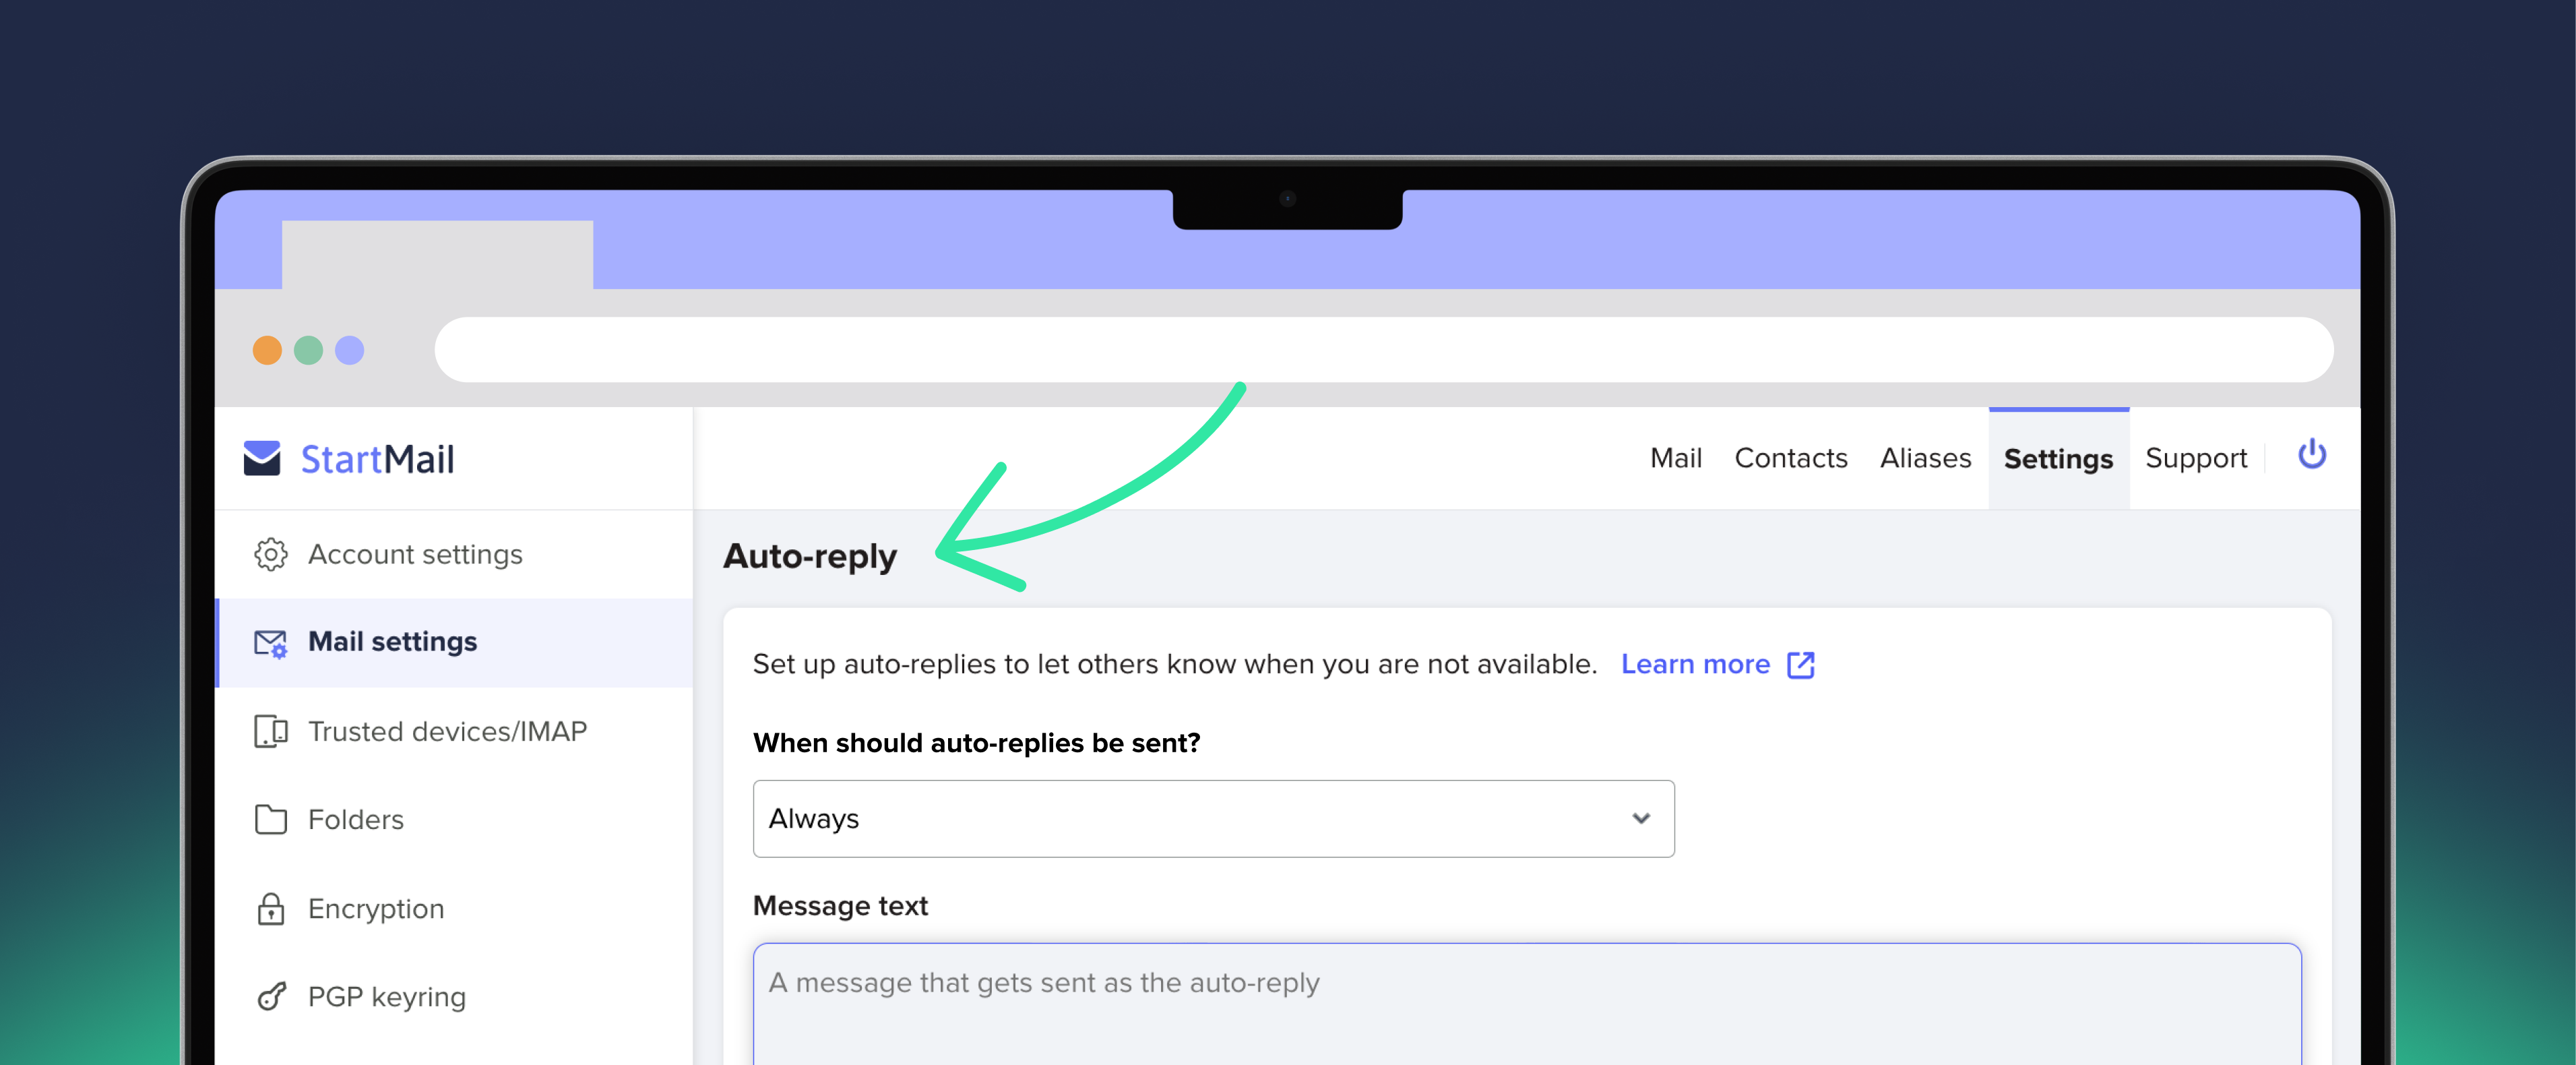 StartMail interface of Auto-reply in Mail Settings